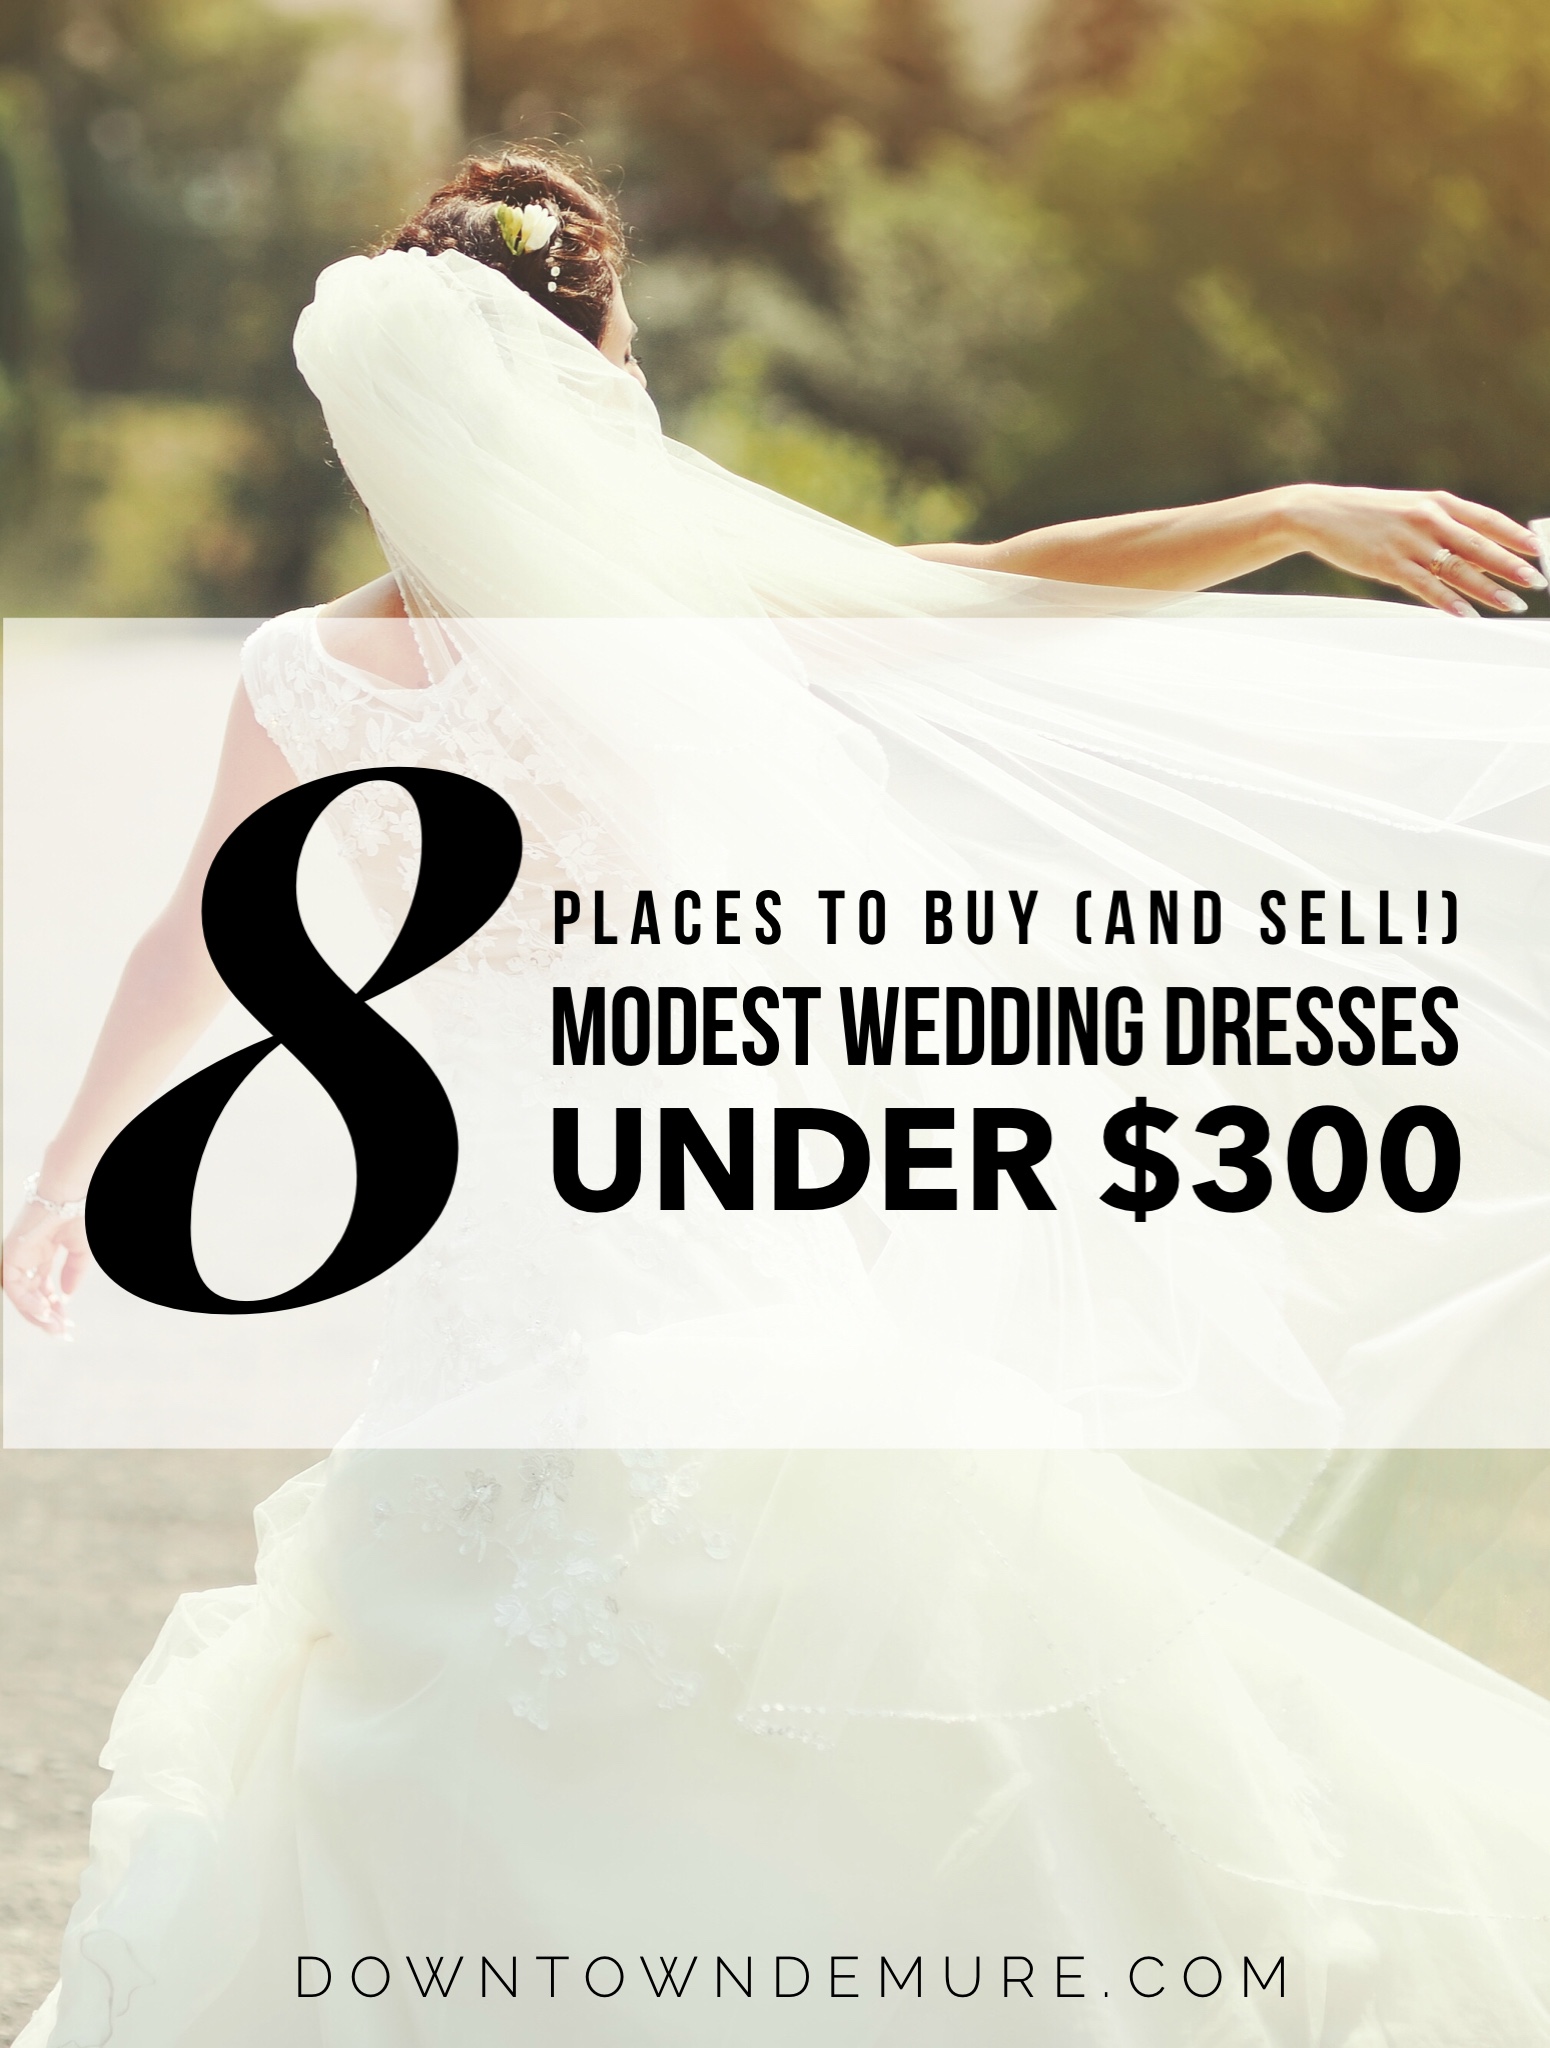 Where to find modest wedding dresses under $300 - Downtown Demure